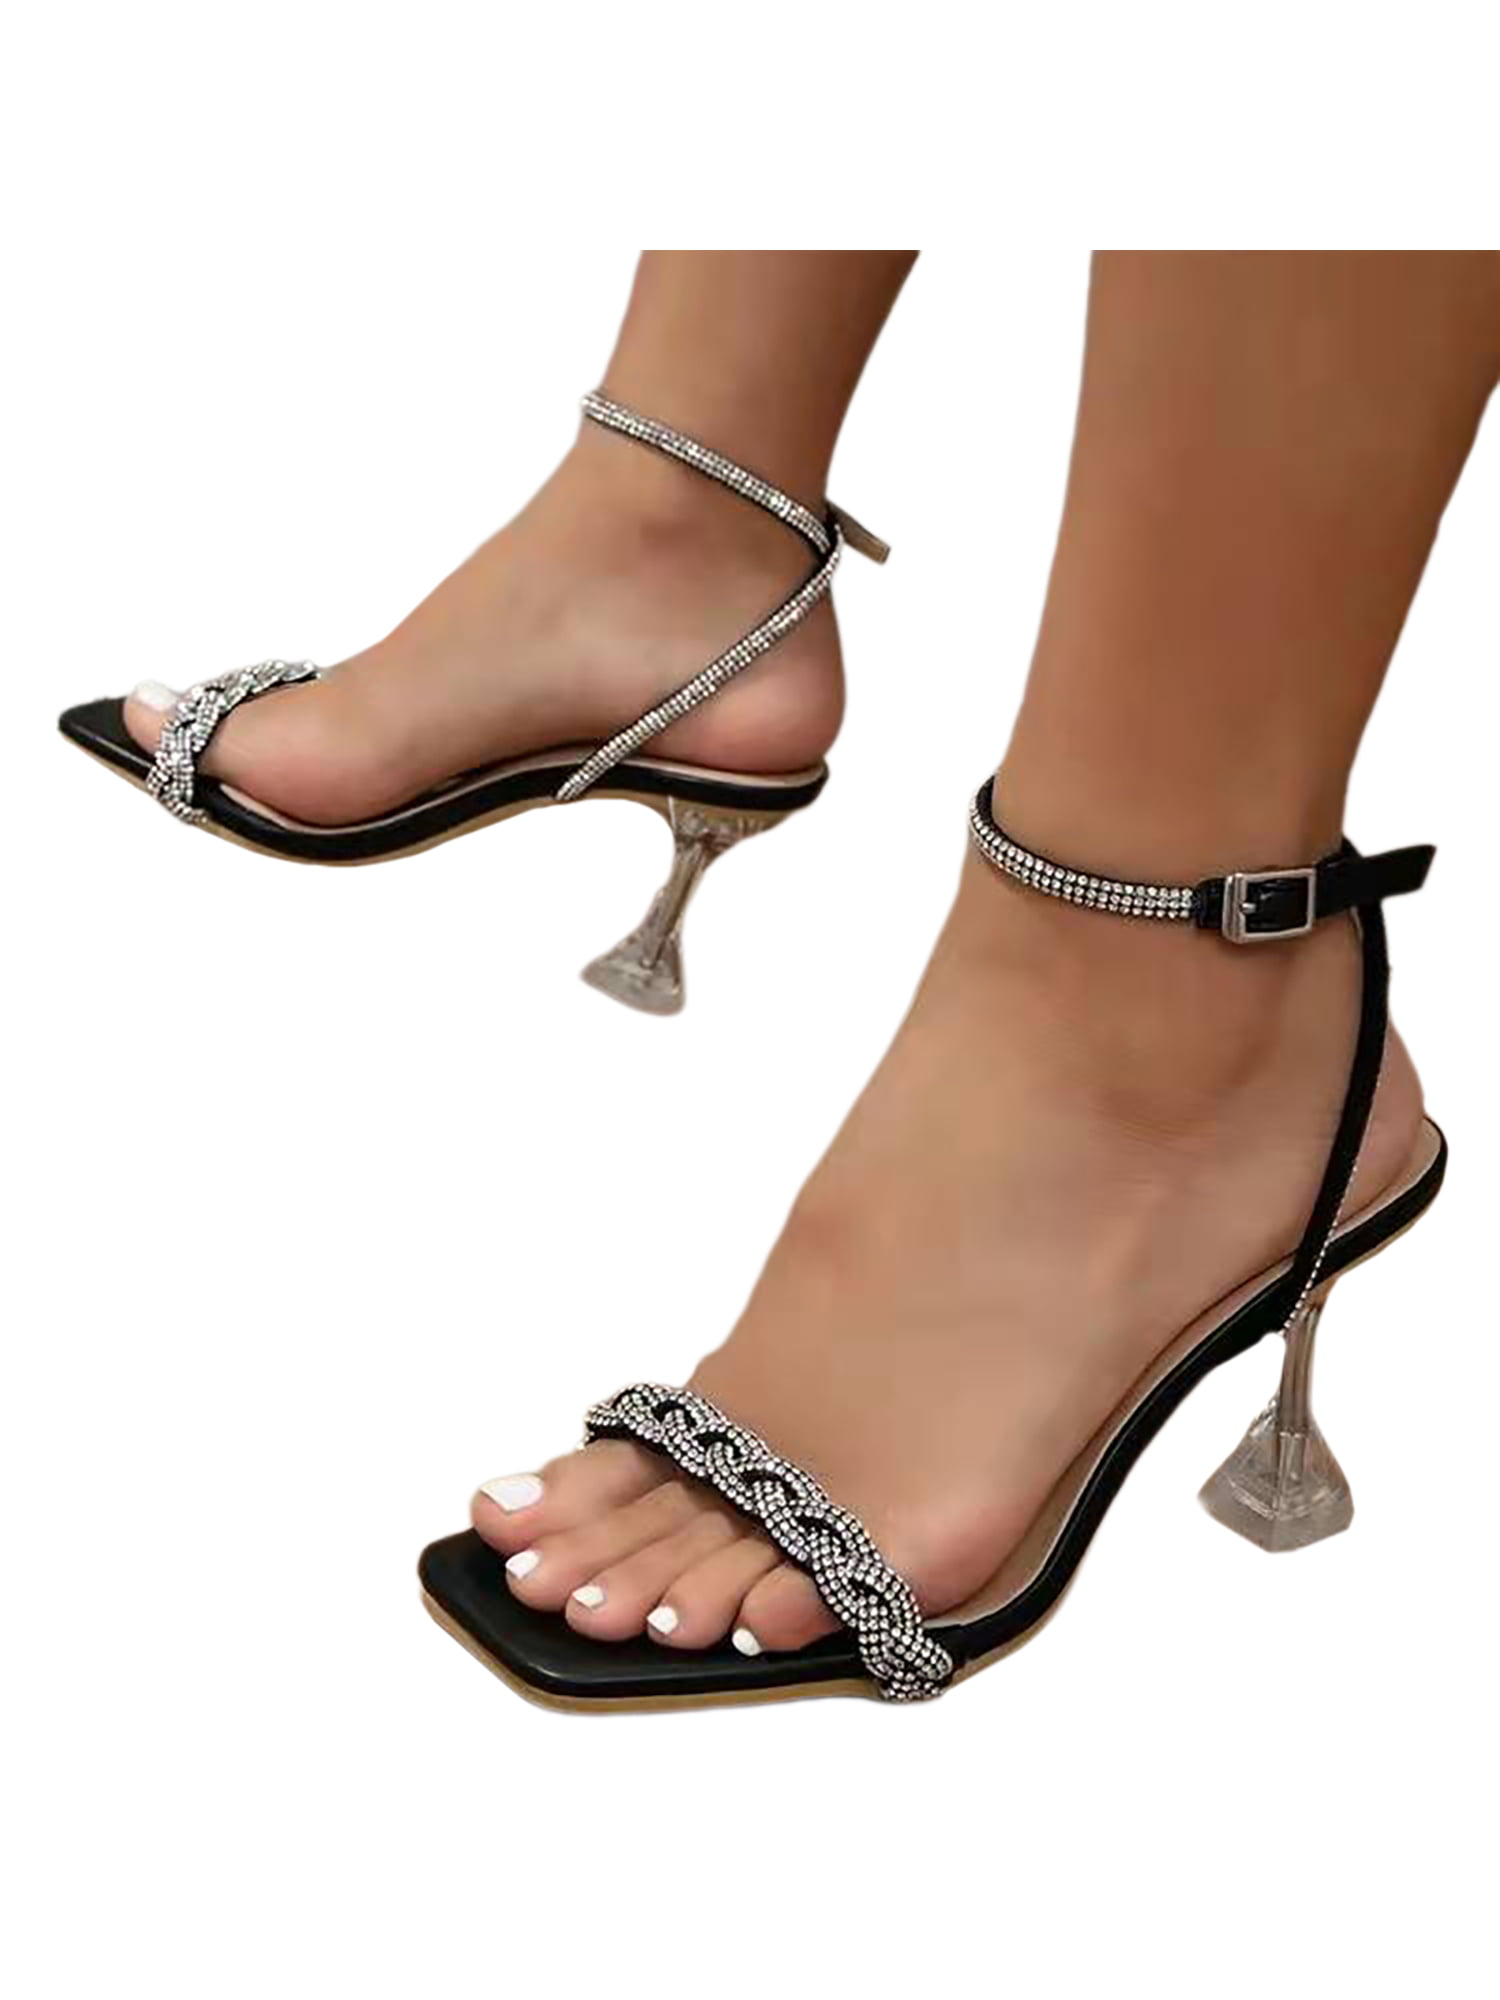 Womens Ankle Strap Curved Heel Sandals Ladies Square Toe Buckle Party Shoes Size